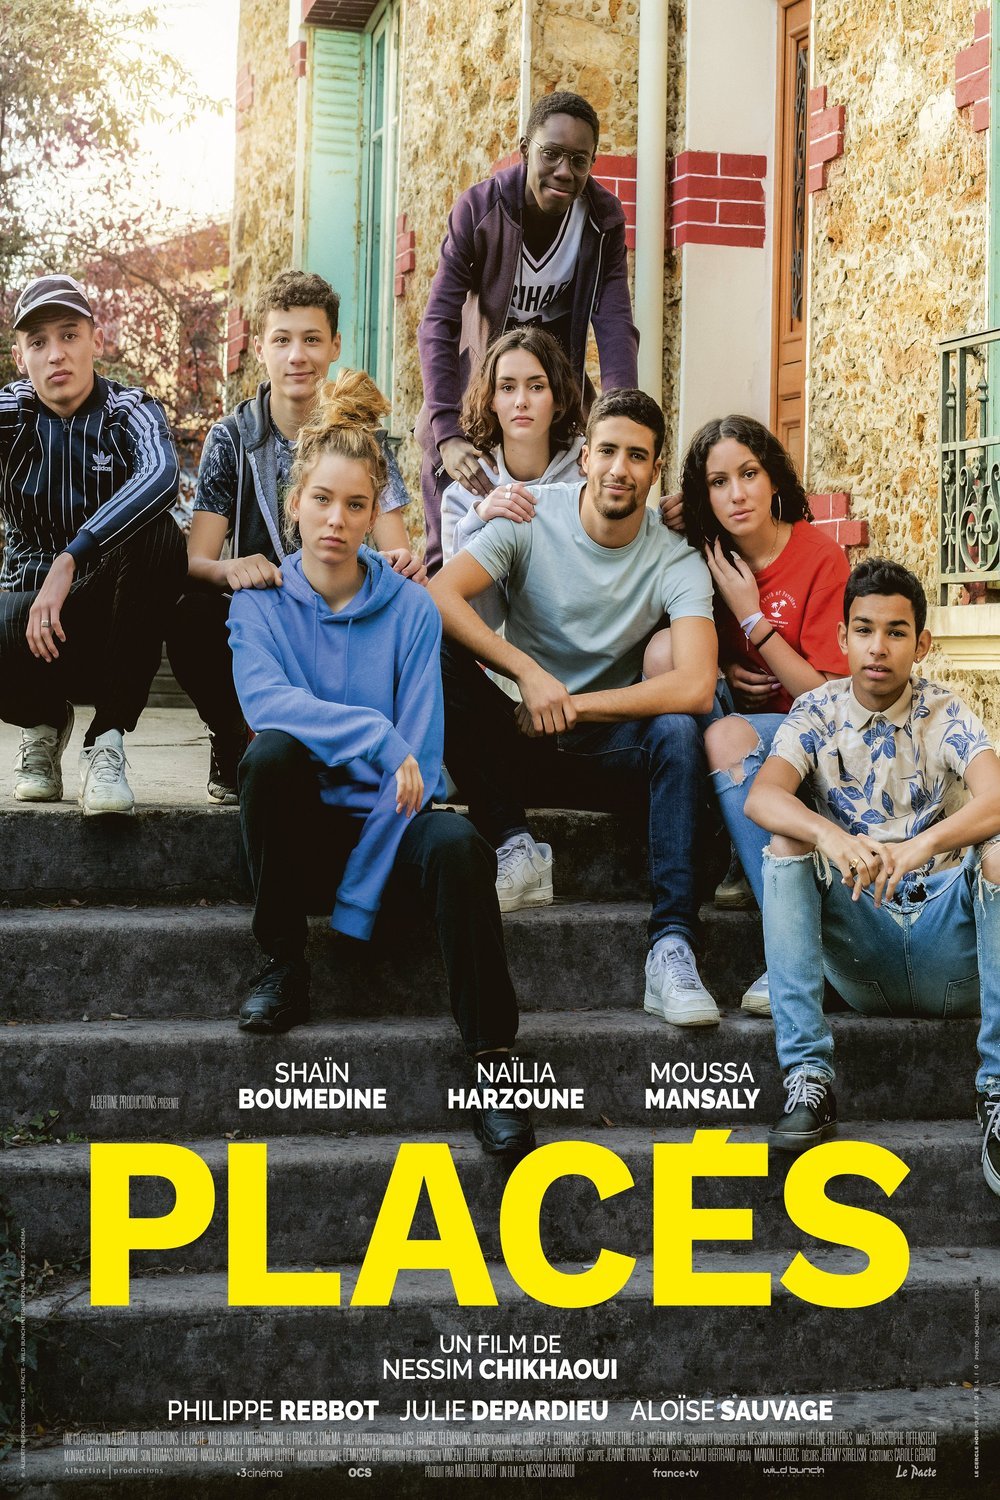 Poster of the movie Placés